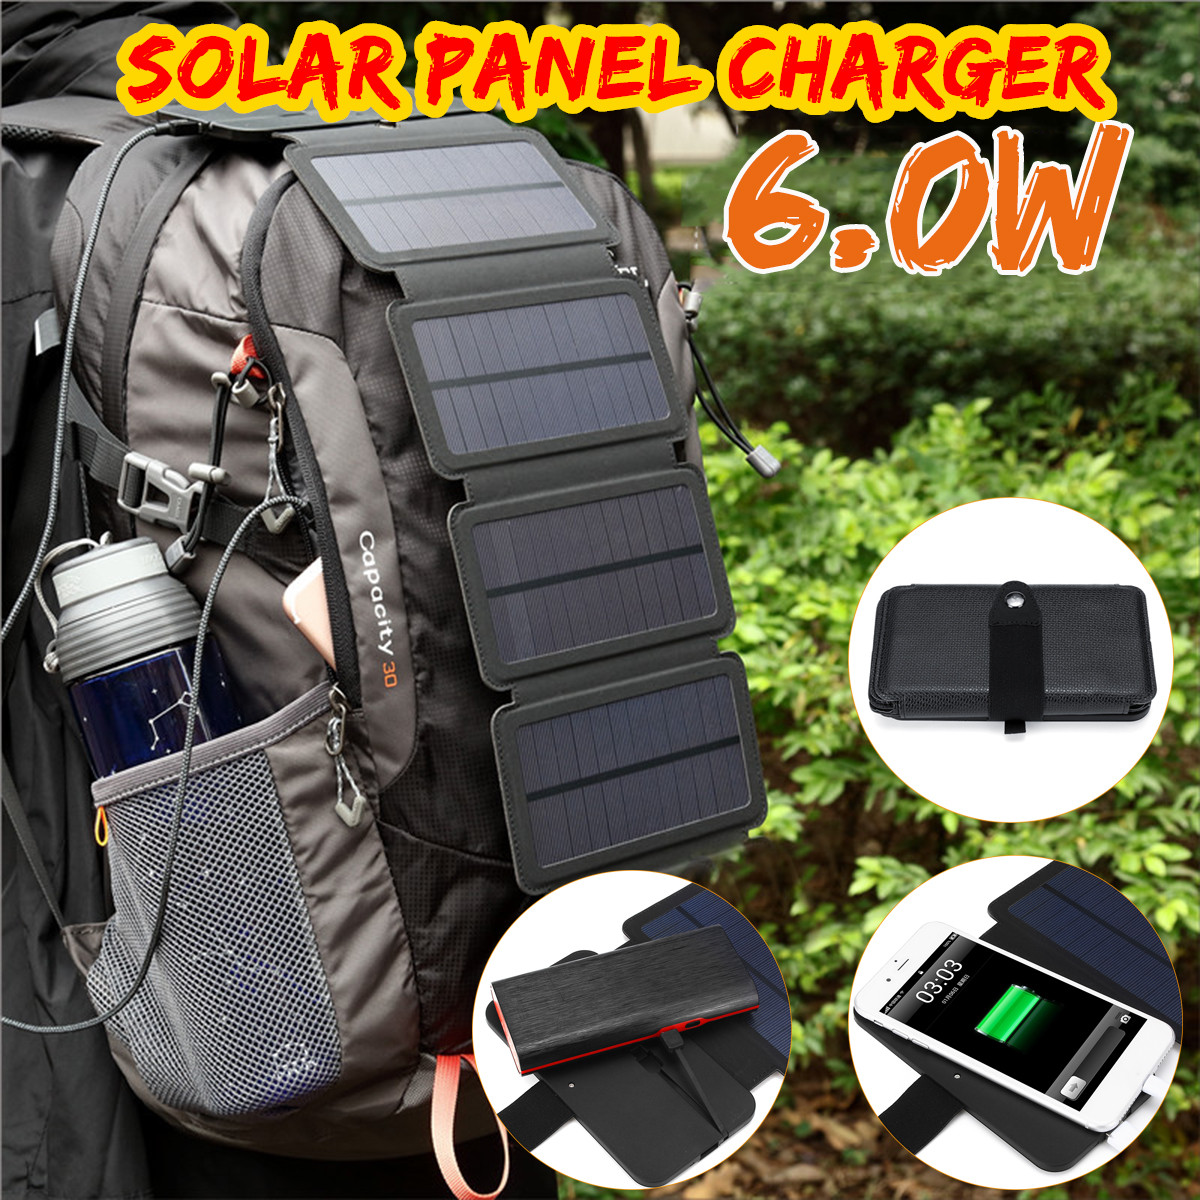 6W-Portable-Foldable-Solar-Panel-Power-Charger-For-Phone-MP3MP4PDA-Power-Bank-1430184-1